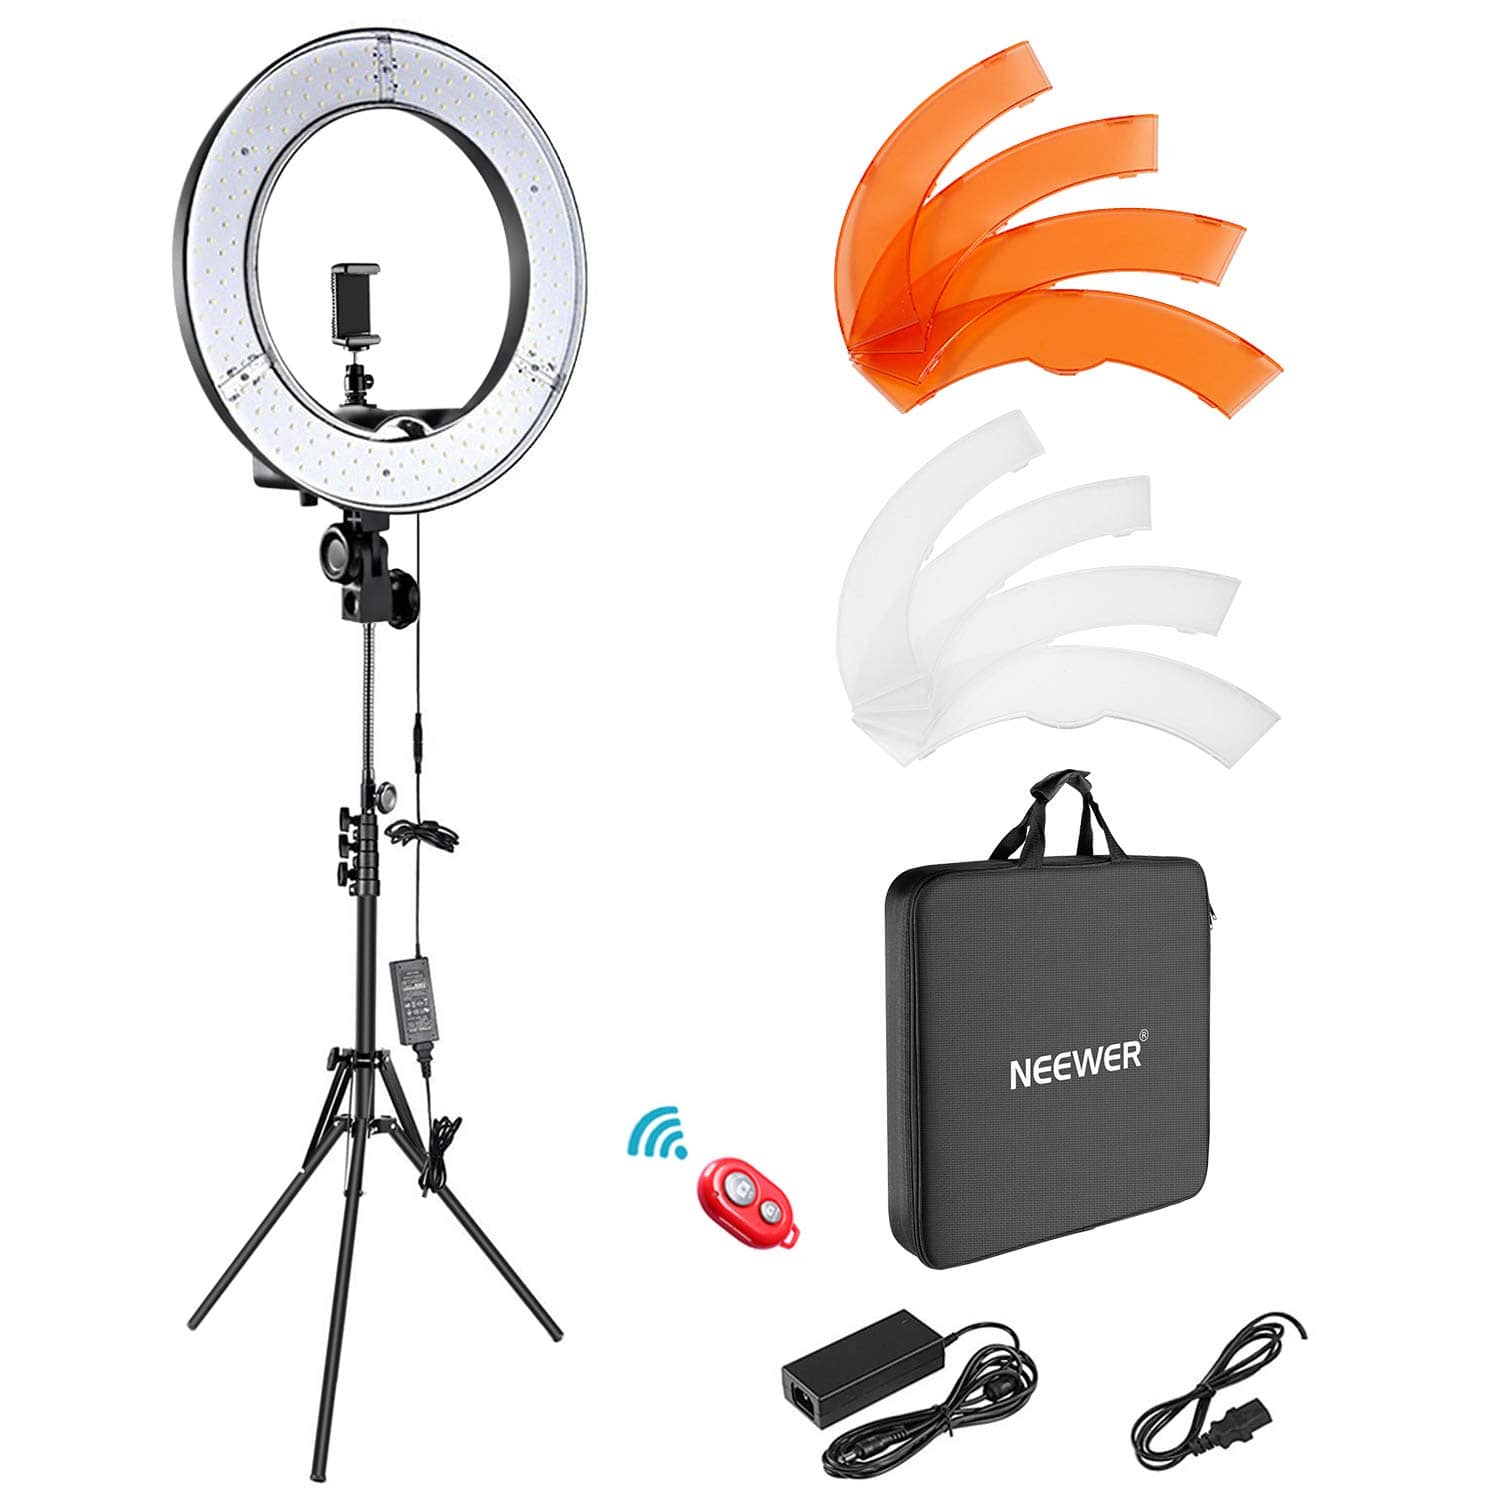 Neewer Camera Photo Video Lightning Kit- 18 inches-48 centimeters Outer 55W 5500K Dimmable LED Ring Light